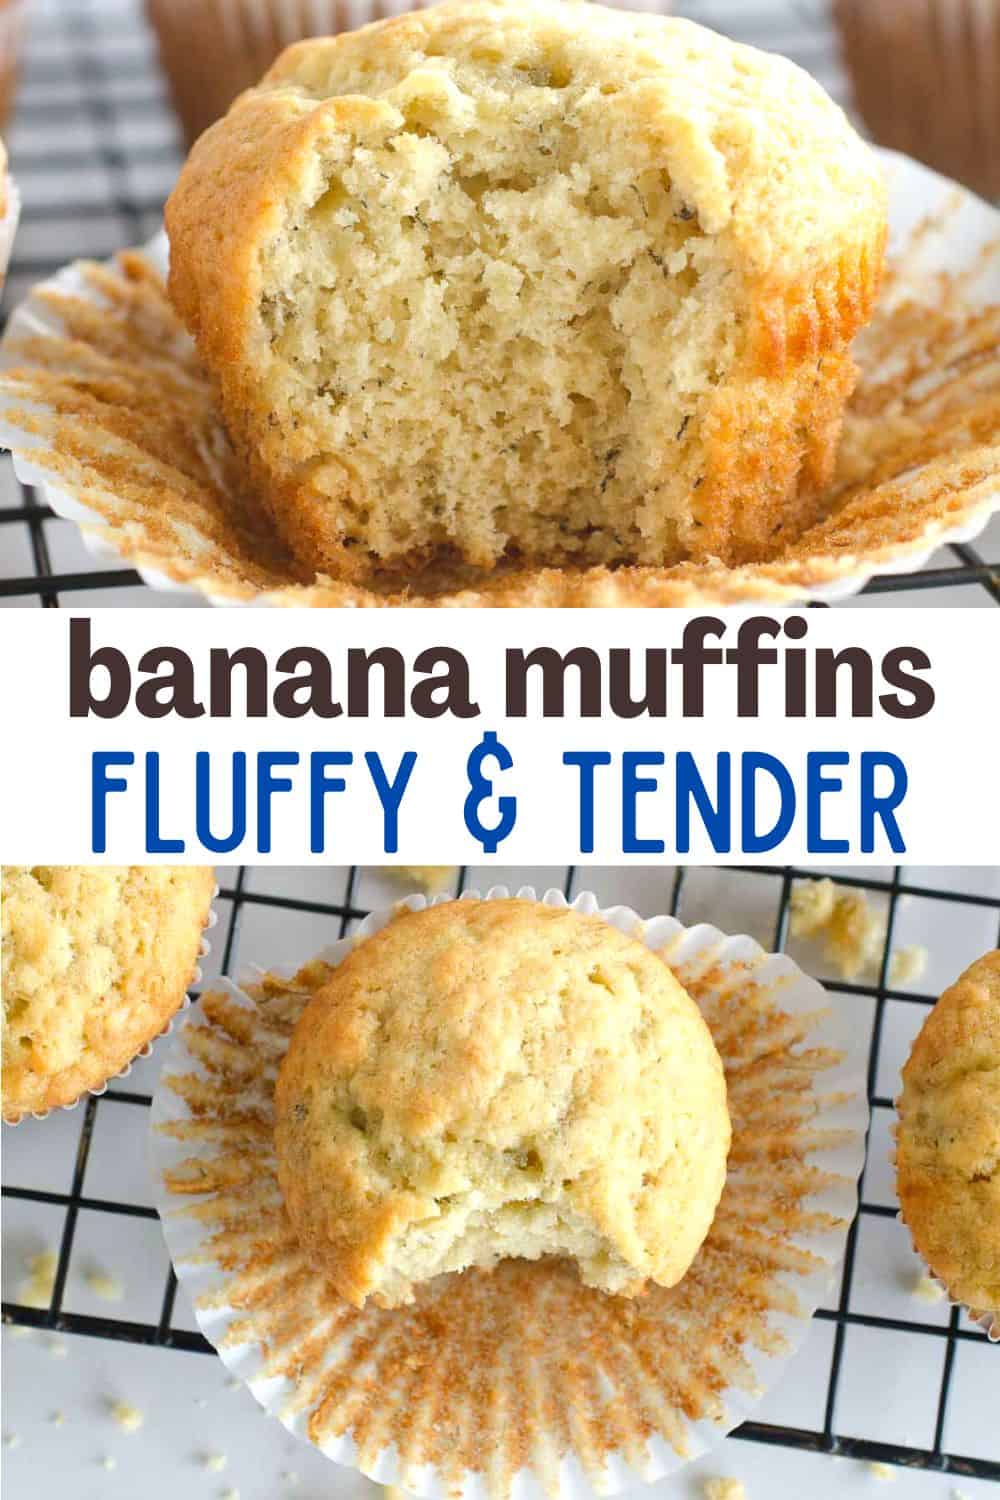 Fluffy and moist banana muffins. Everyone asks for this recipe! These banana muffins are a family favorite!